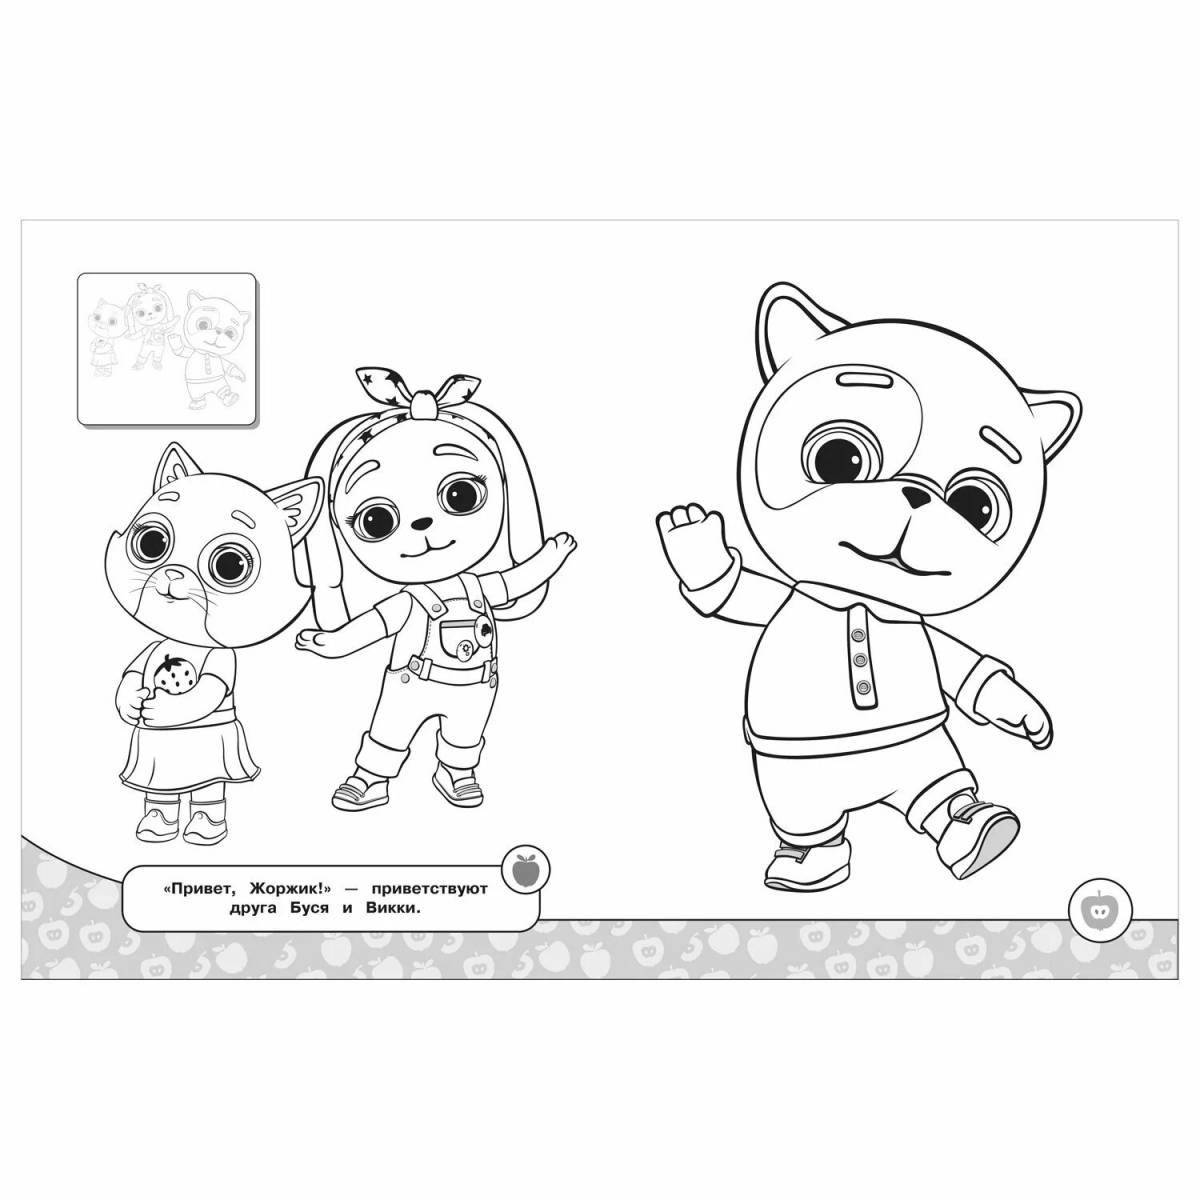 Dan kitty and dogs glitter coloring book